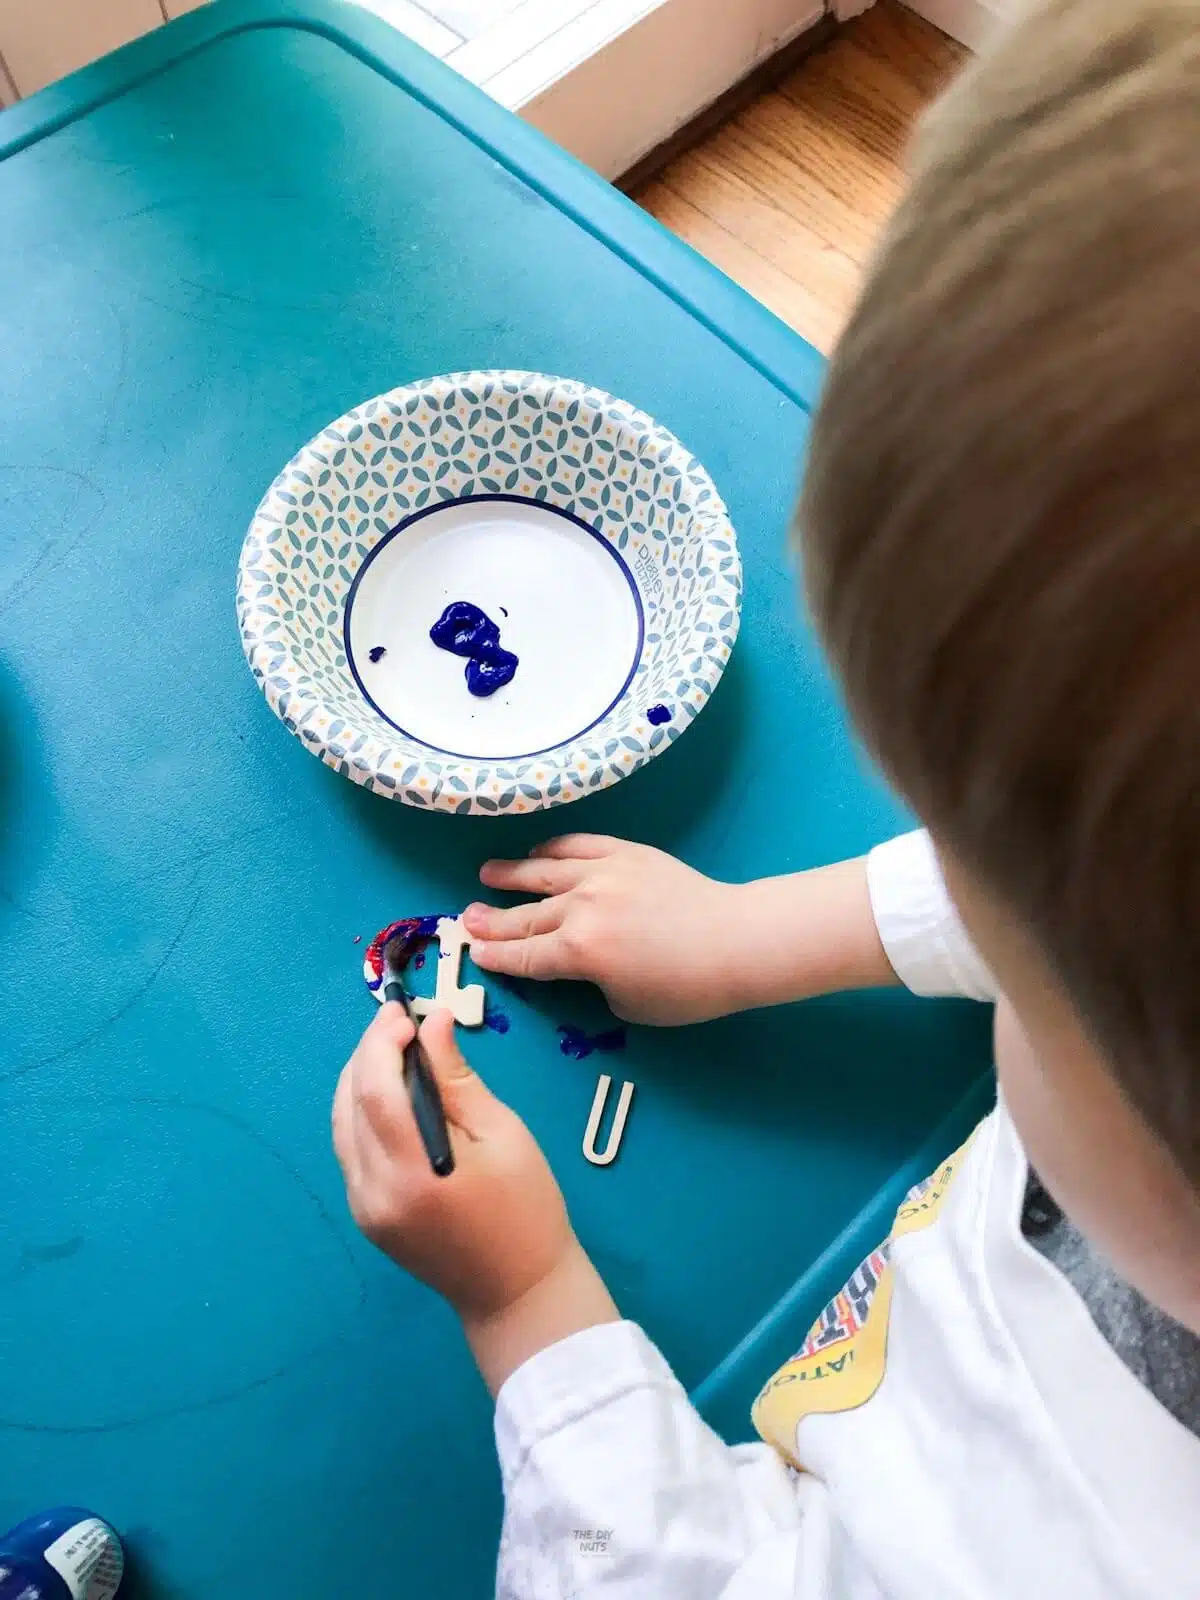 little boy painting small wooden letters with blue paint on teal table.